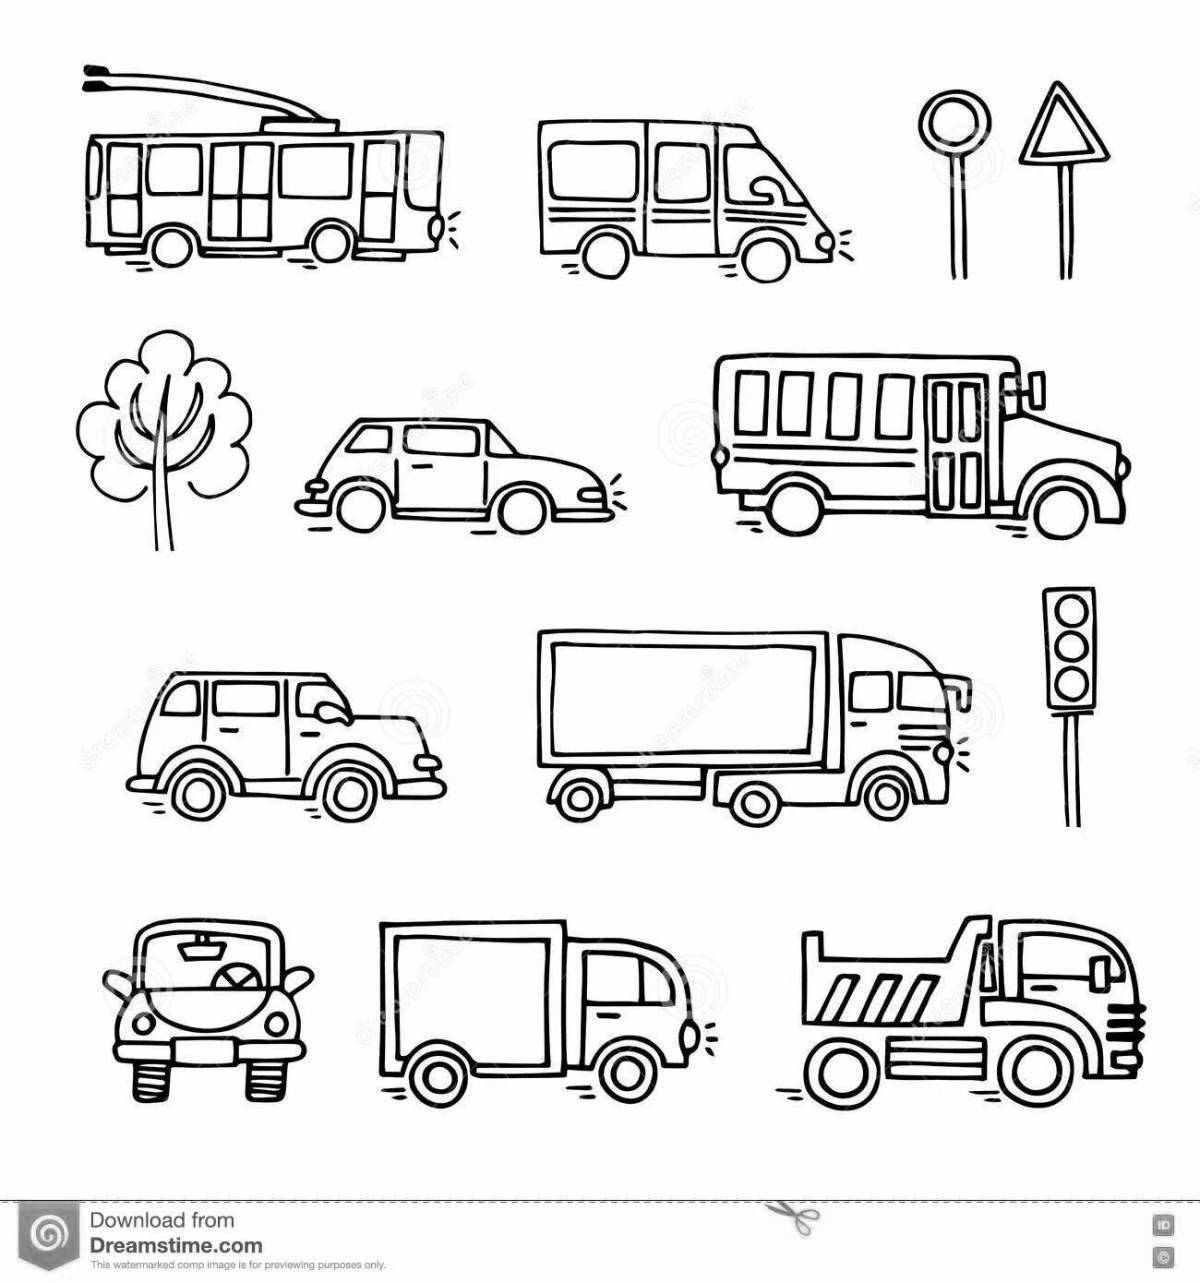 Adorable ground vehicle coloring book